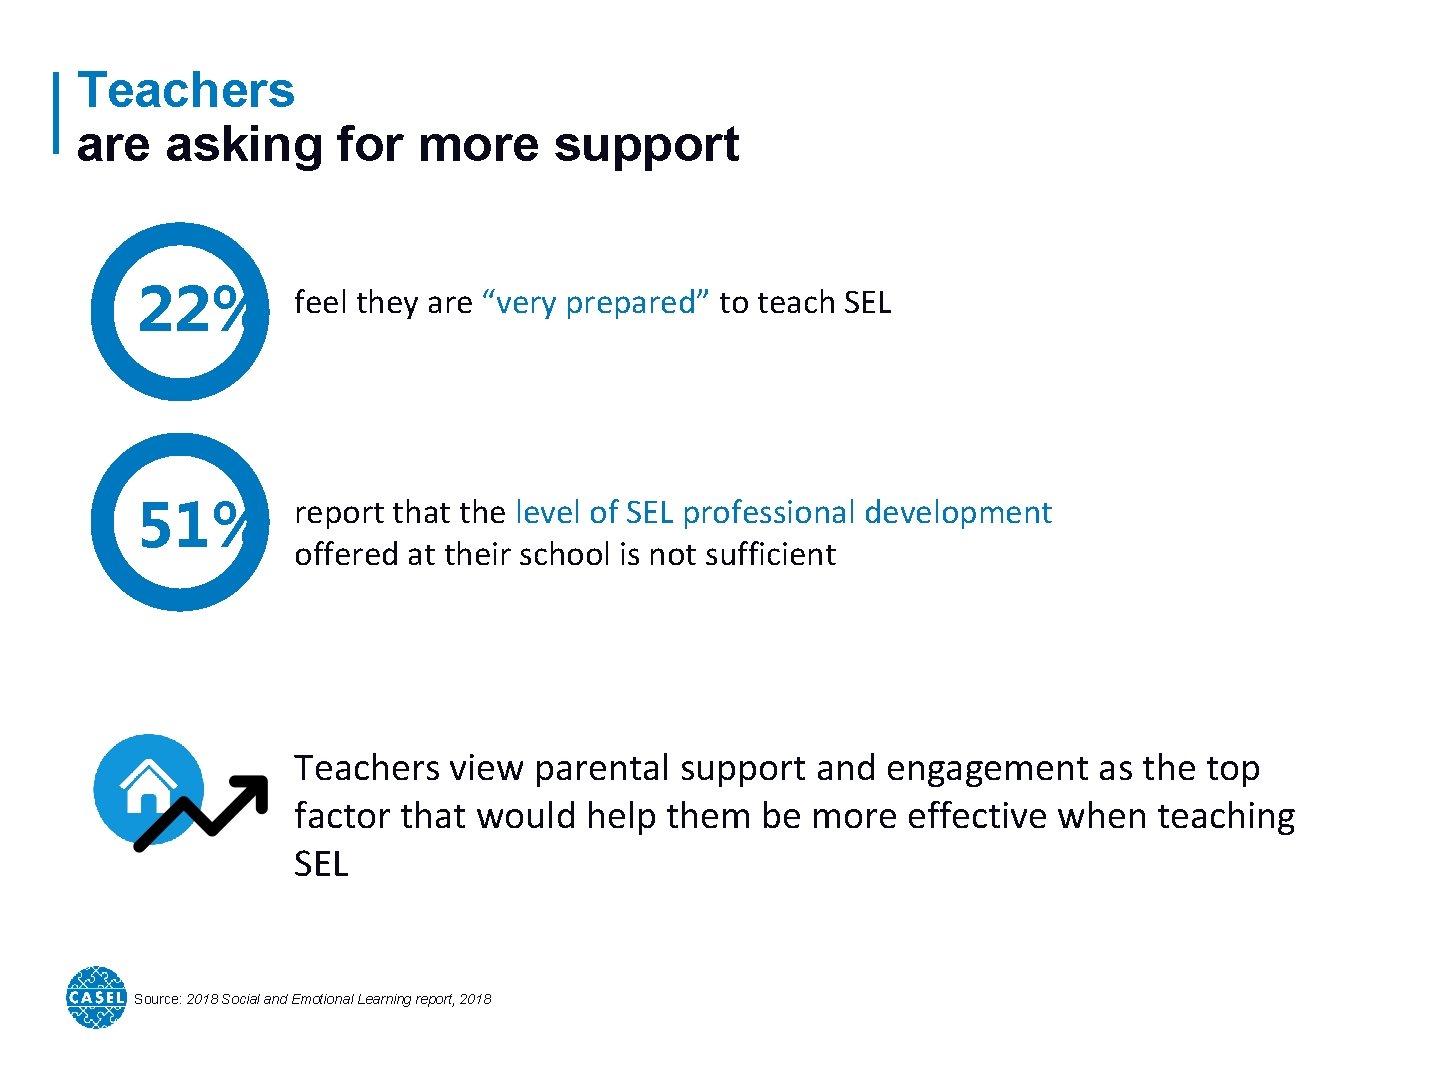 Teachers are asking for more support 22% feel they are “very prepared” to teach